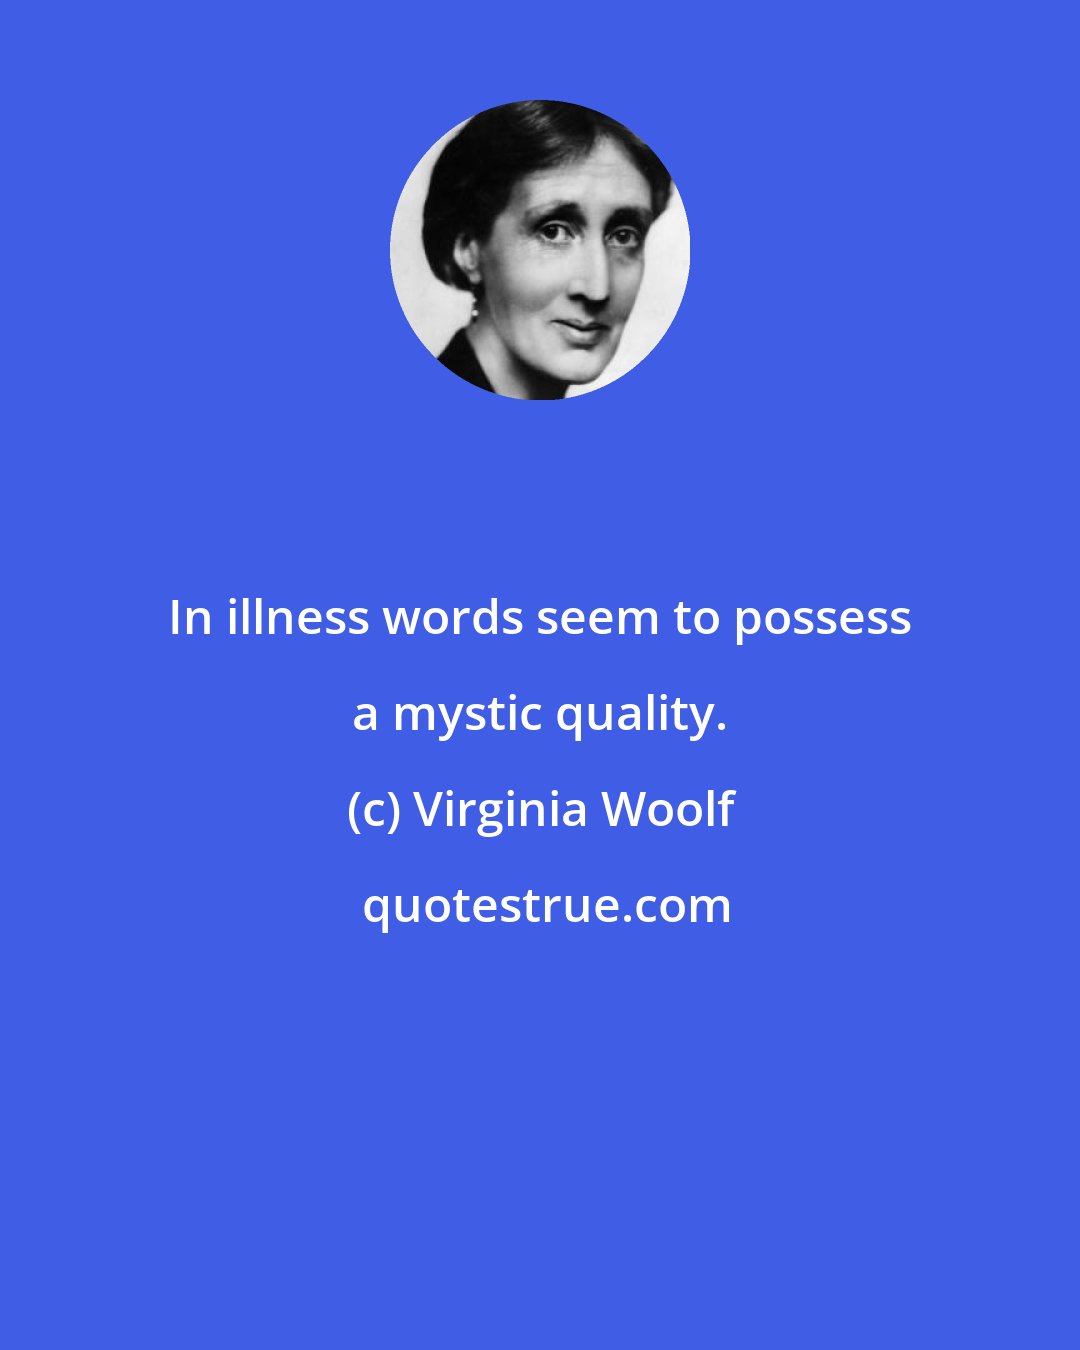 Virginia Woolf: In illness words seem to possess a mystic quality.